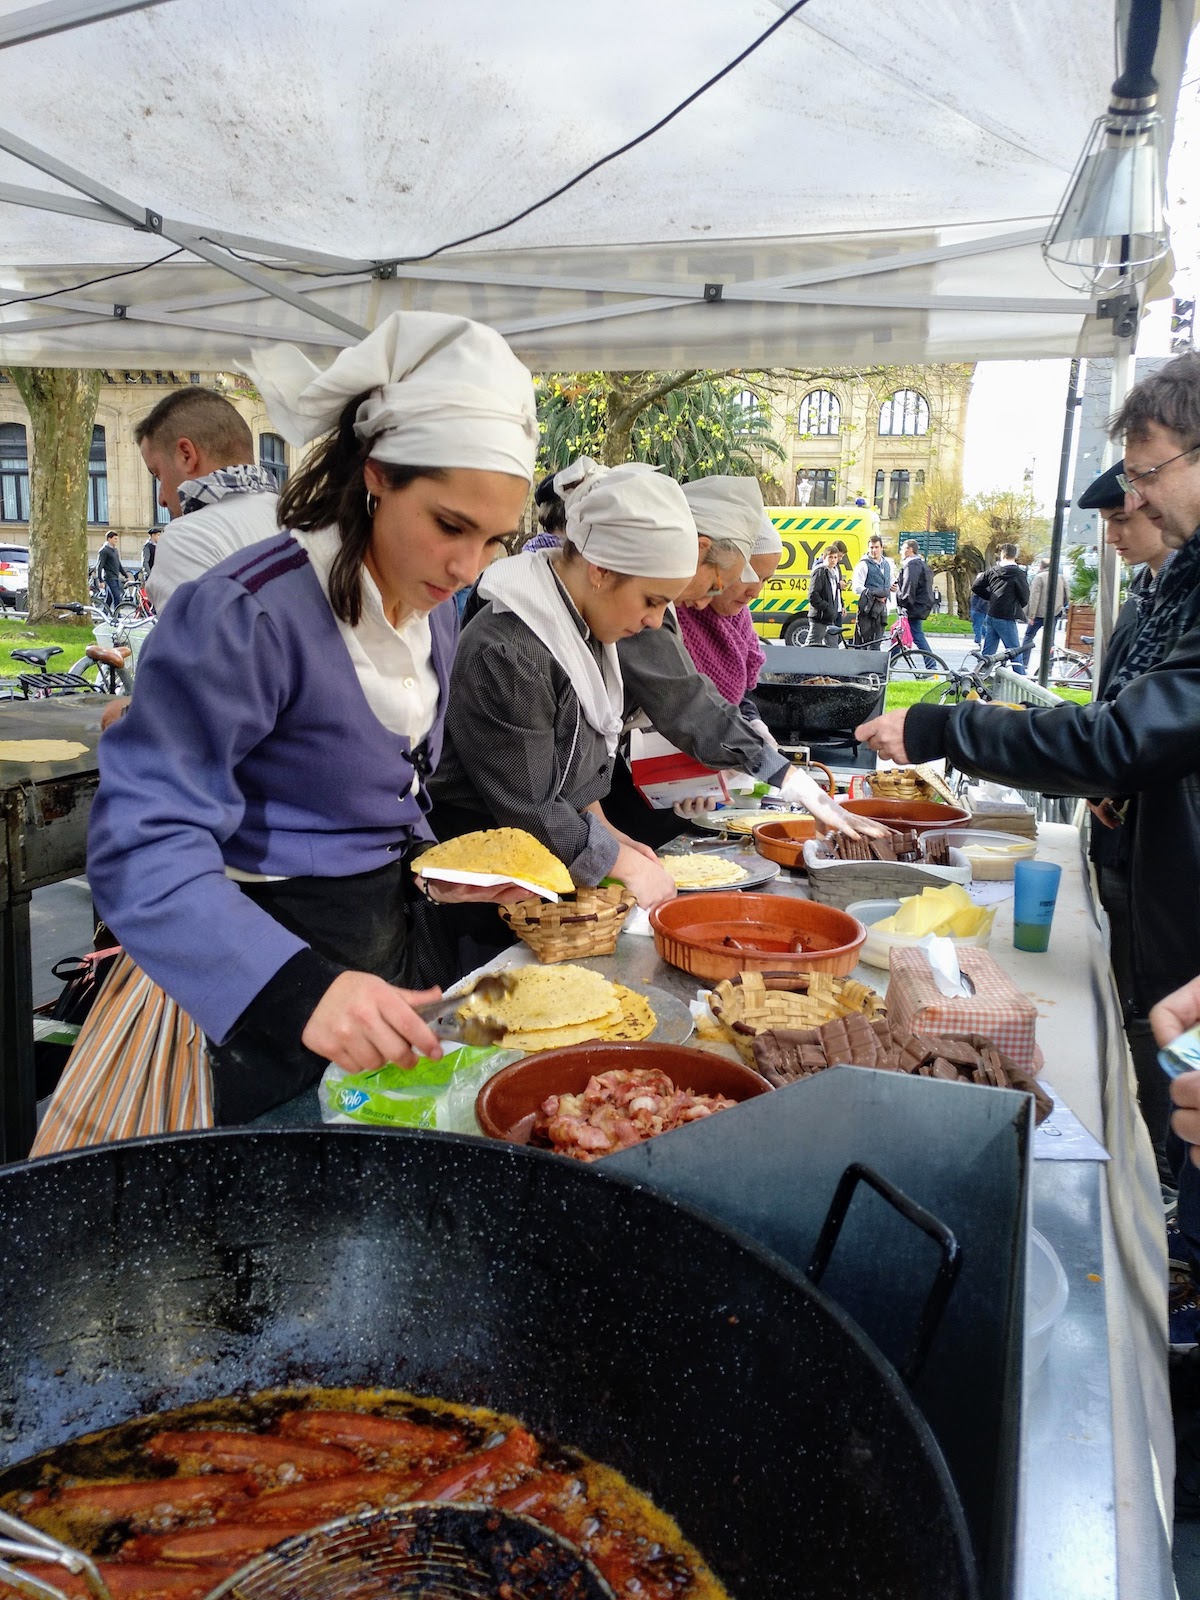 Women in traditional Basque dress serve food from a market stall